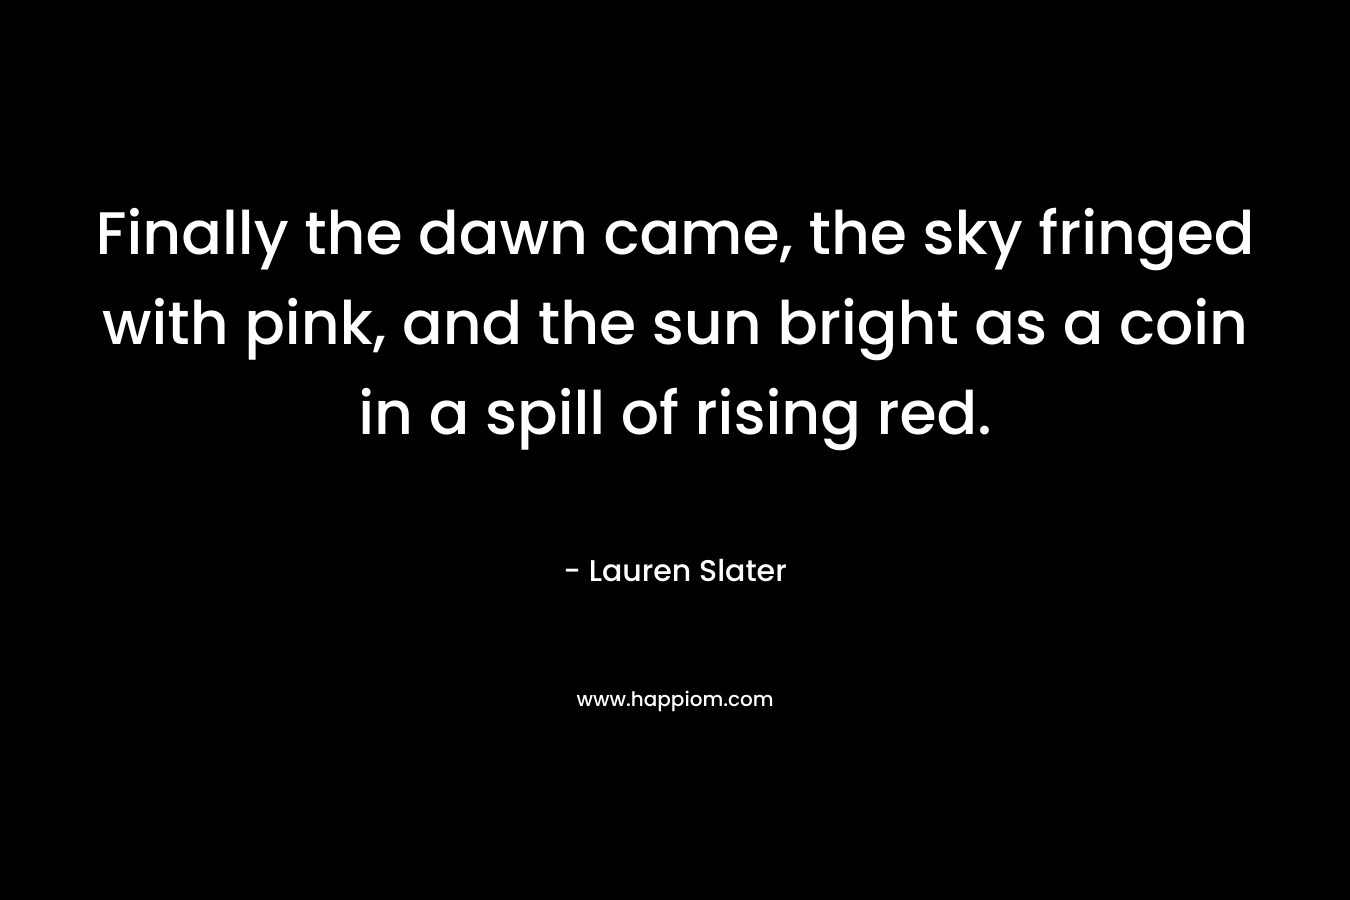 Finally the dawn came, the sky fringed with pink, and the sun bright as a coin in a spill of rising red. – Lauren Slater